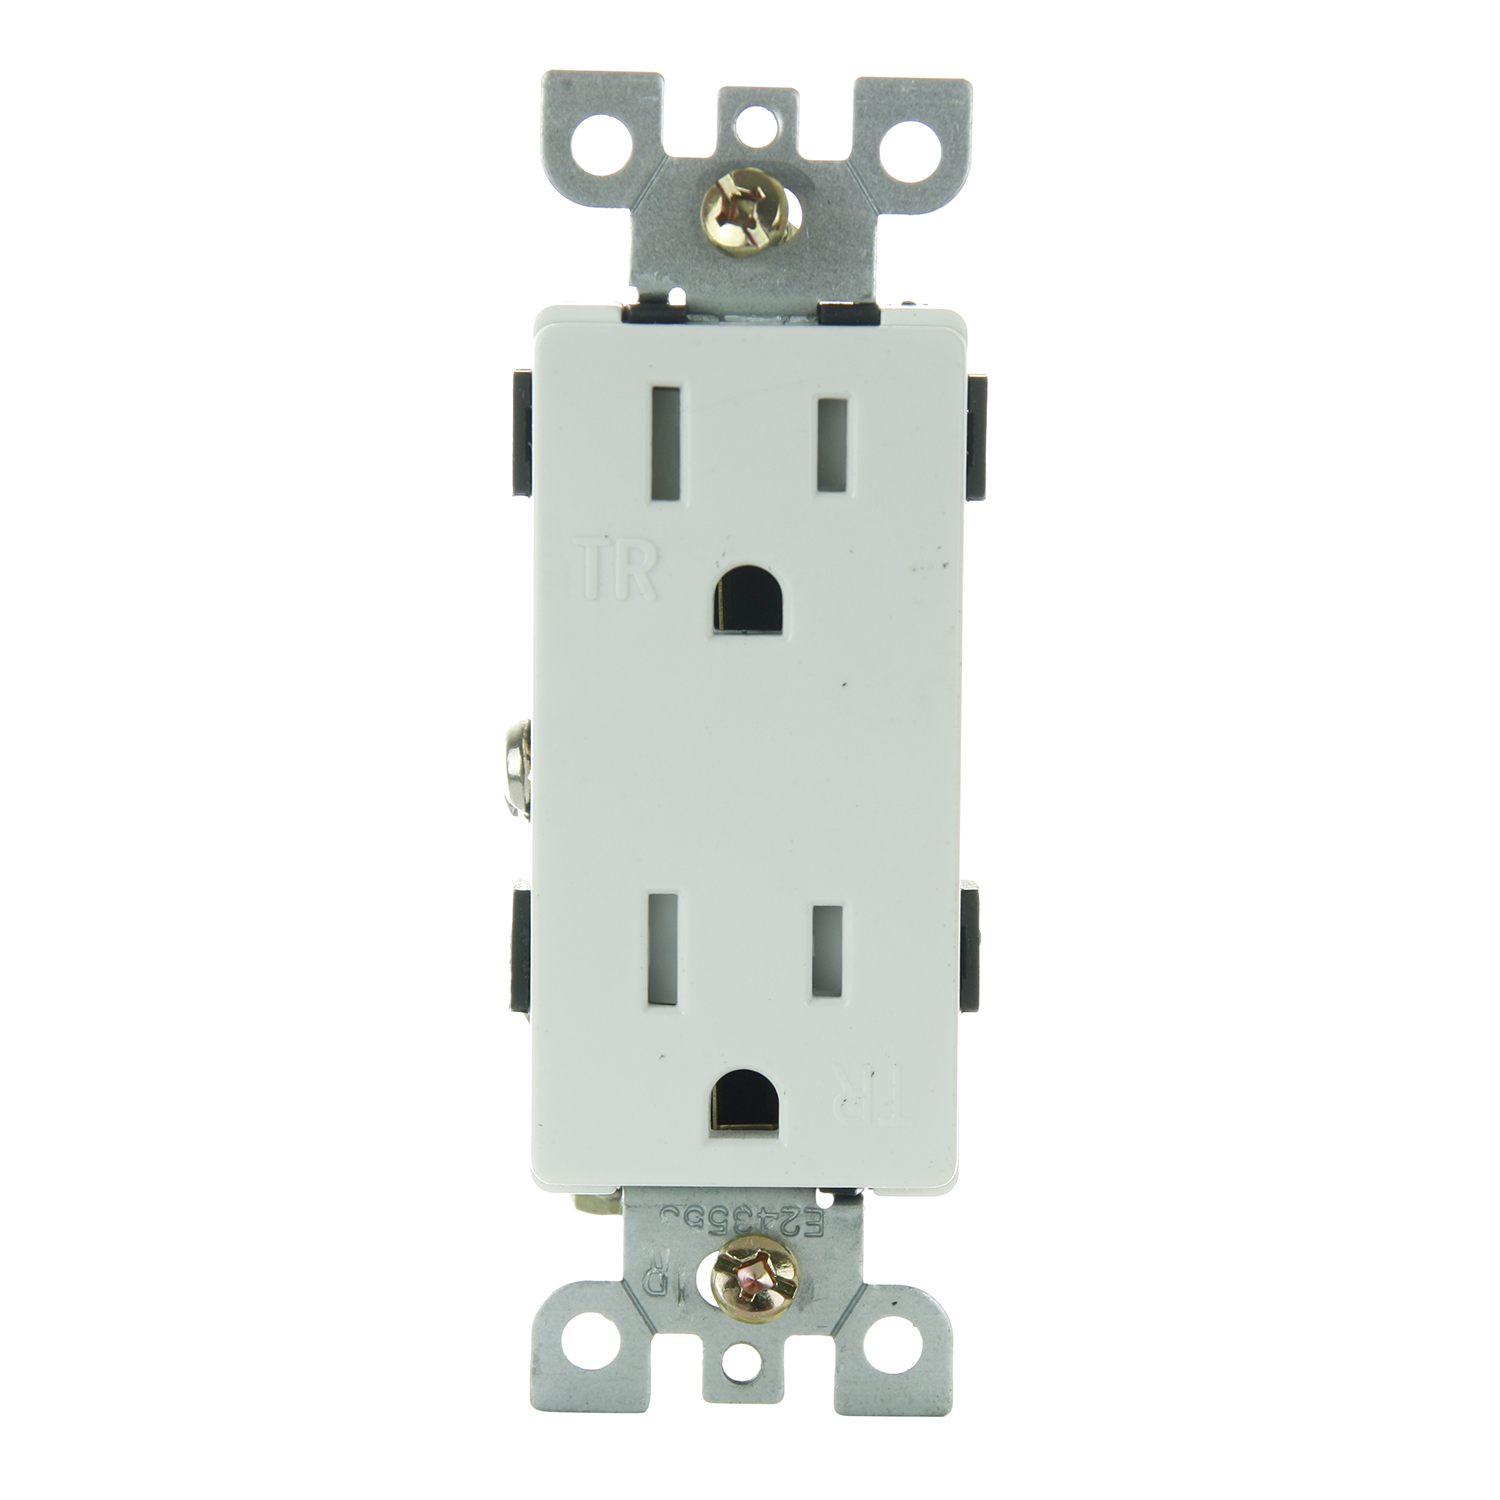 Outlet, UL Listed,15 Amp, 125 Volts, Grounded, Modern Design Wht